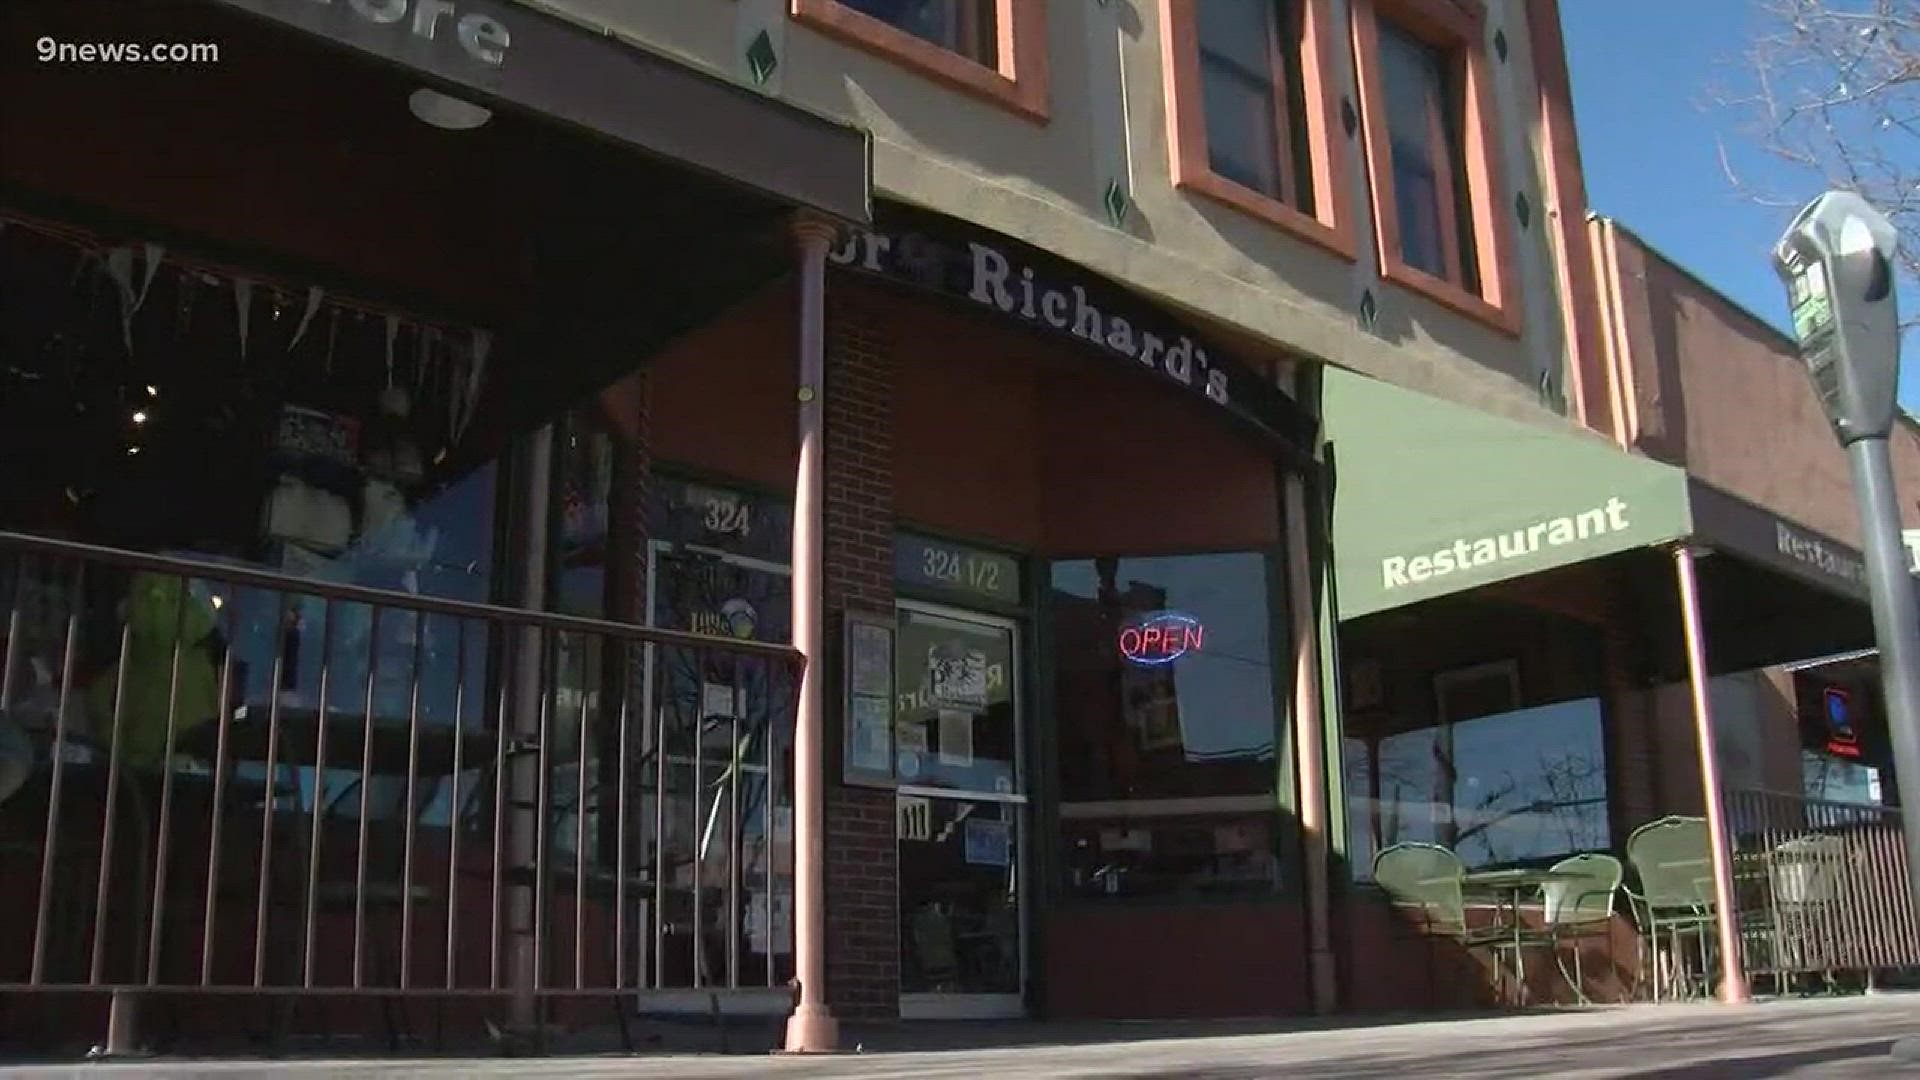 Poor Richard's Restaurant in Colorado Springs said it will provide a free meal to government workers and their families each week the government remains shut down.